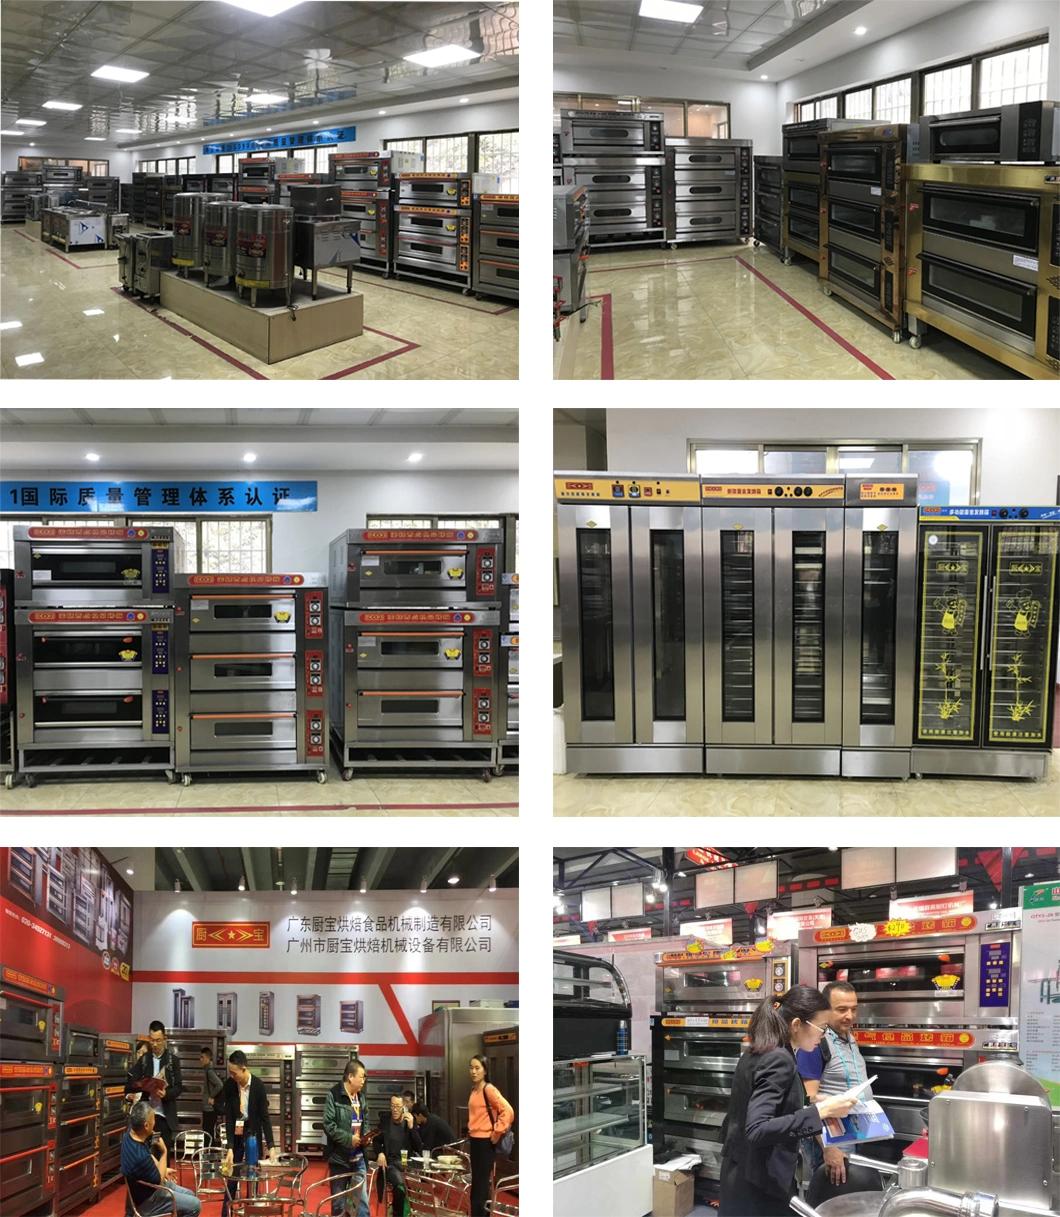 3 Deck 9 Tray Electirc Oven for Guangdong Chubao Commercial Kitchen Baking Equipment Bakery Machine Food Machinery